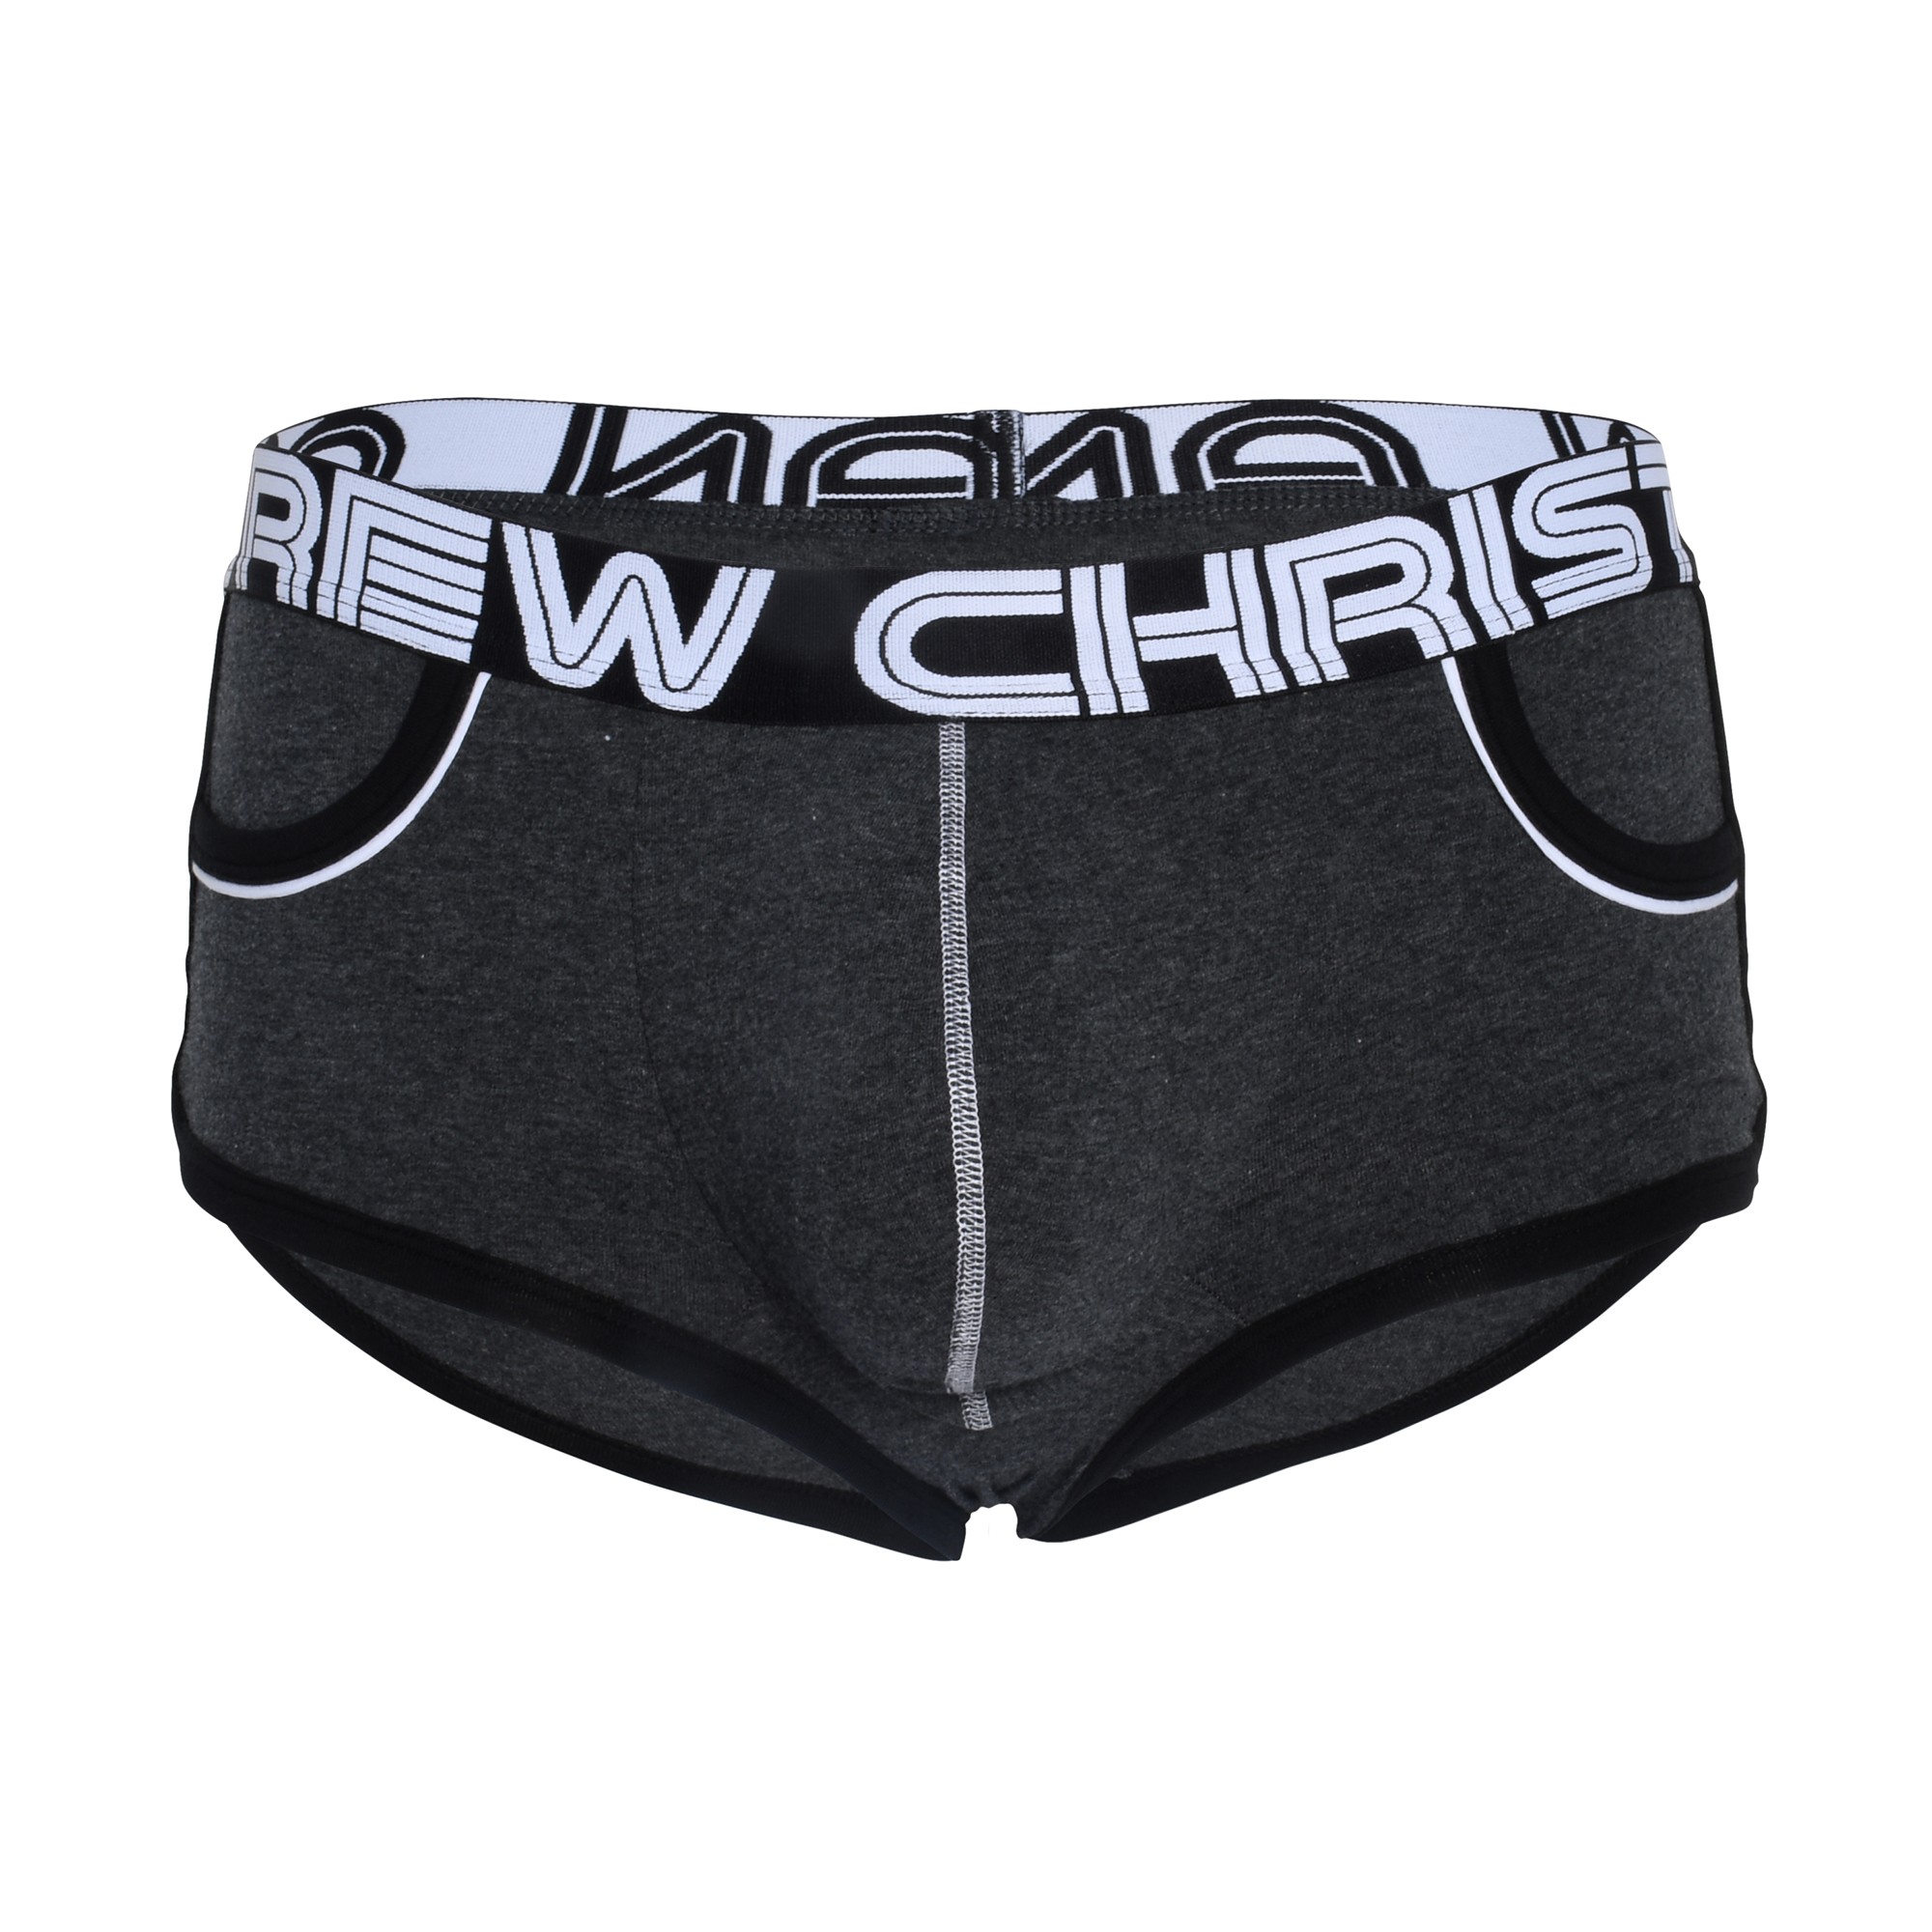 Underwear Suggestion: Andrew Christian - Show-It Retro Pop Boxer - Charcoal